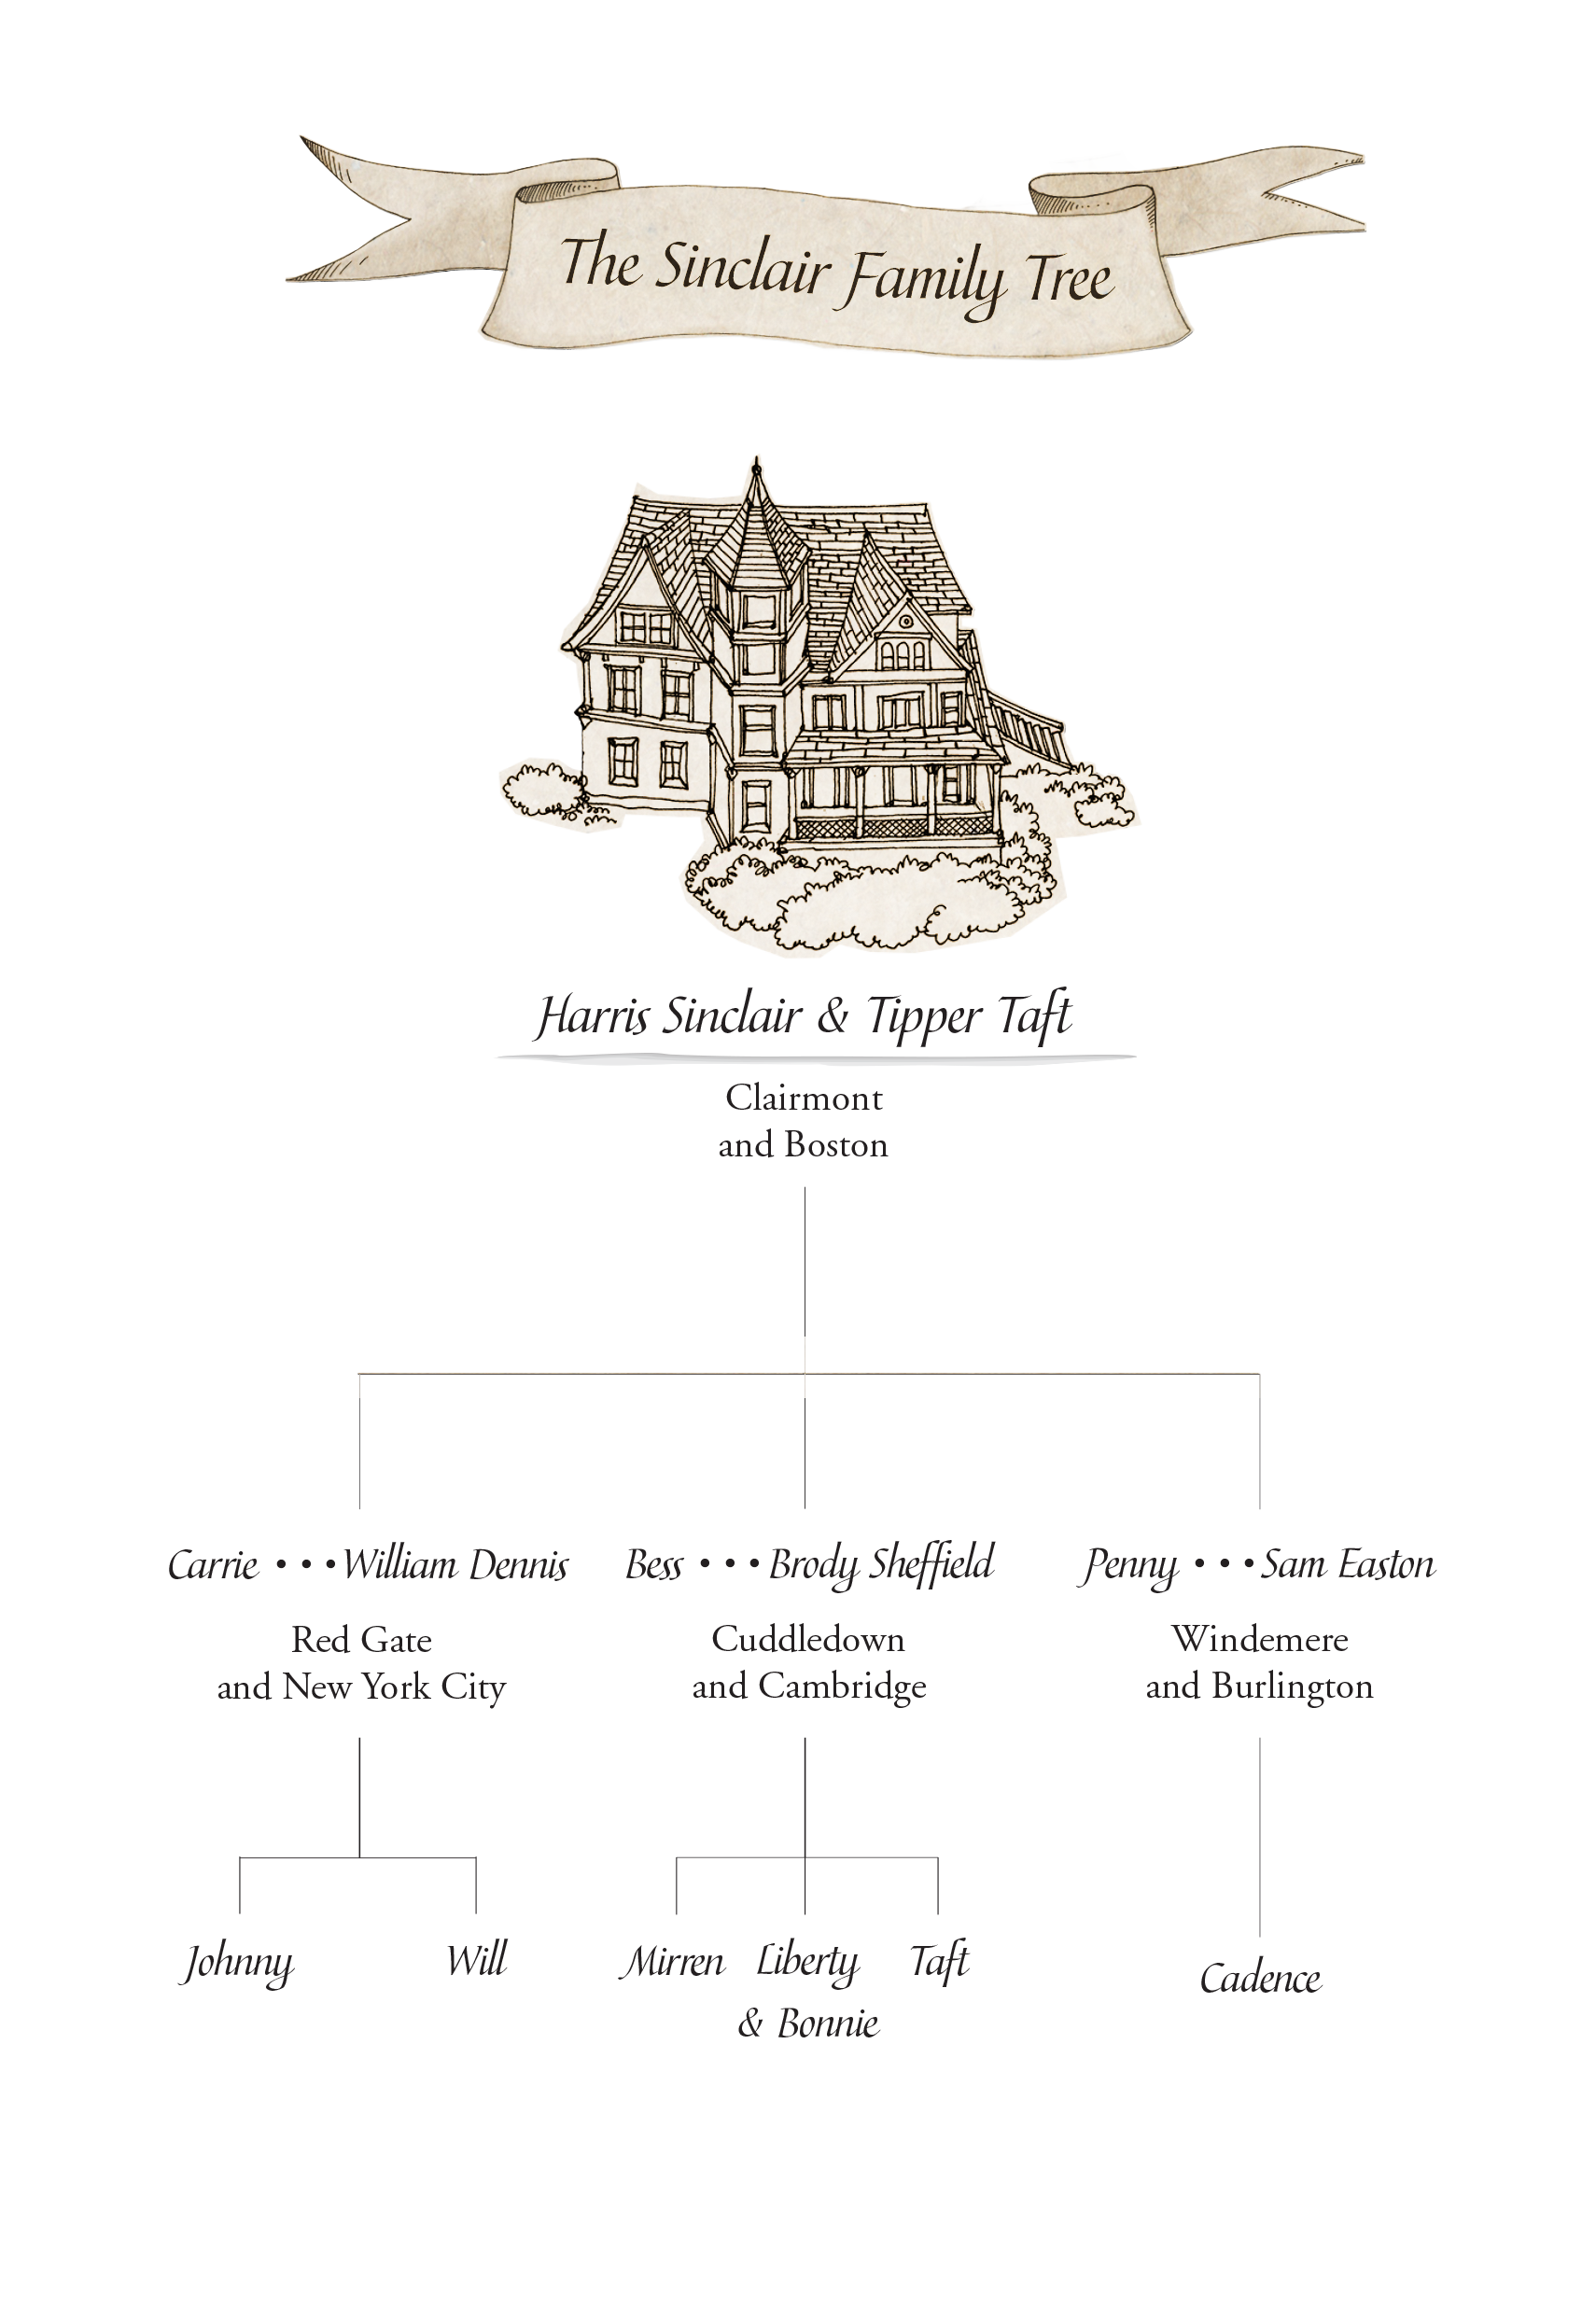 http://we-were-liars-assets.s3.amazonaws.com/img/sinclair-family-tree.png